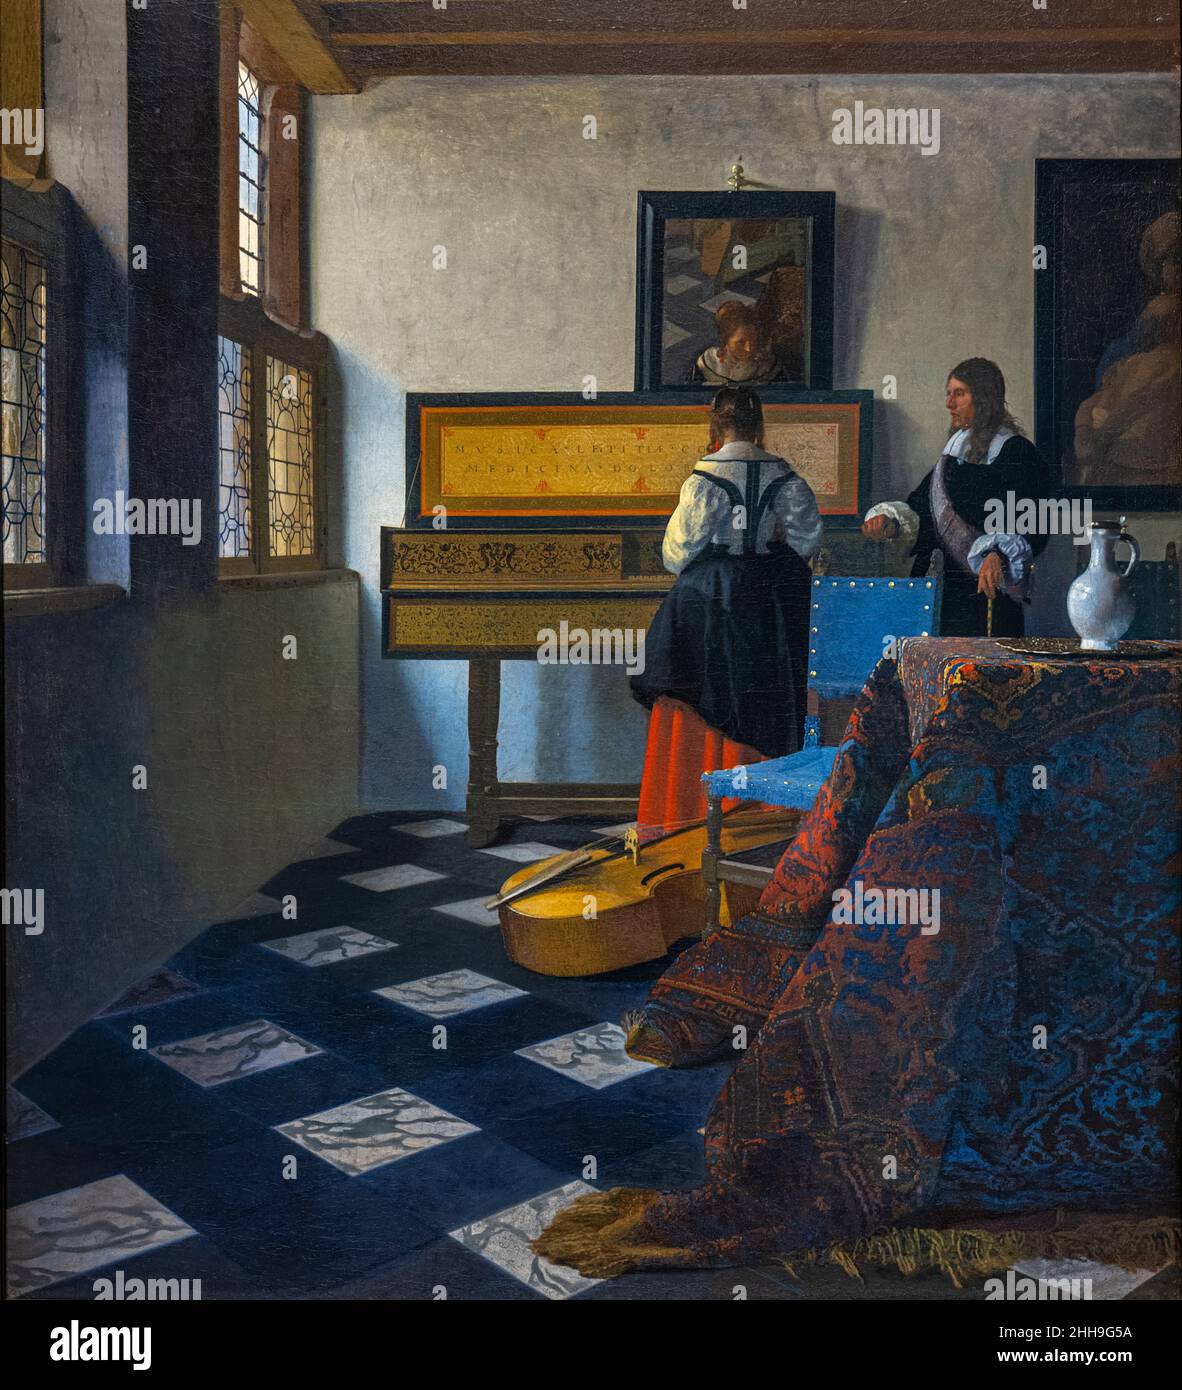 JOHANNES VERMEER (1632-1675) A LADY AT THE VIRGINALS WITH A GENTLEMAN 'THE MUSIC LESSON'(1660) THE QUEEN'S GALLERY BUCKINGHAM PALACE LONDON ENGLAND U Stock Photo